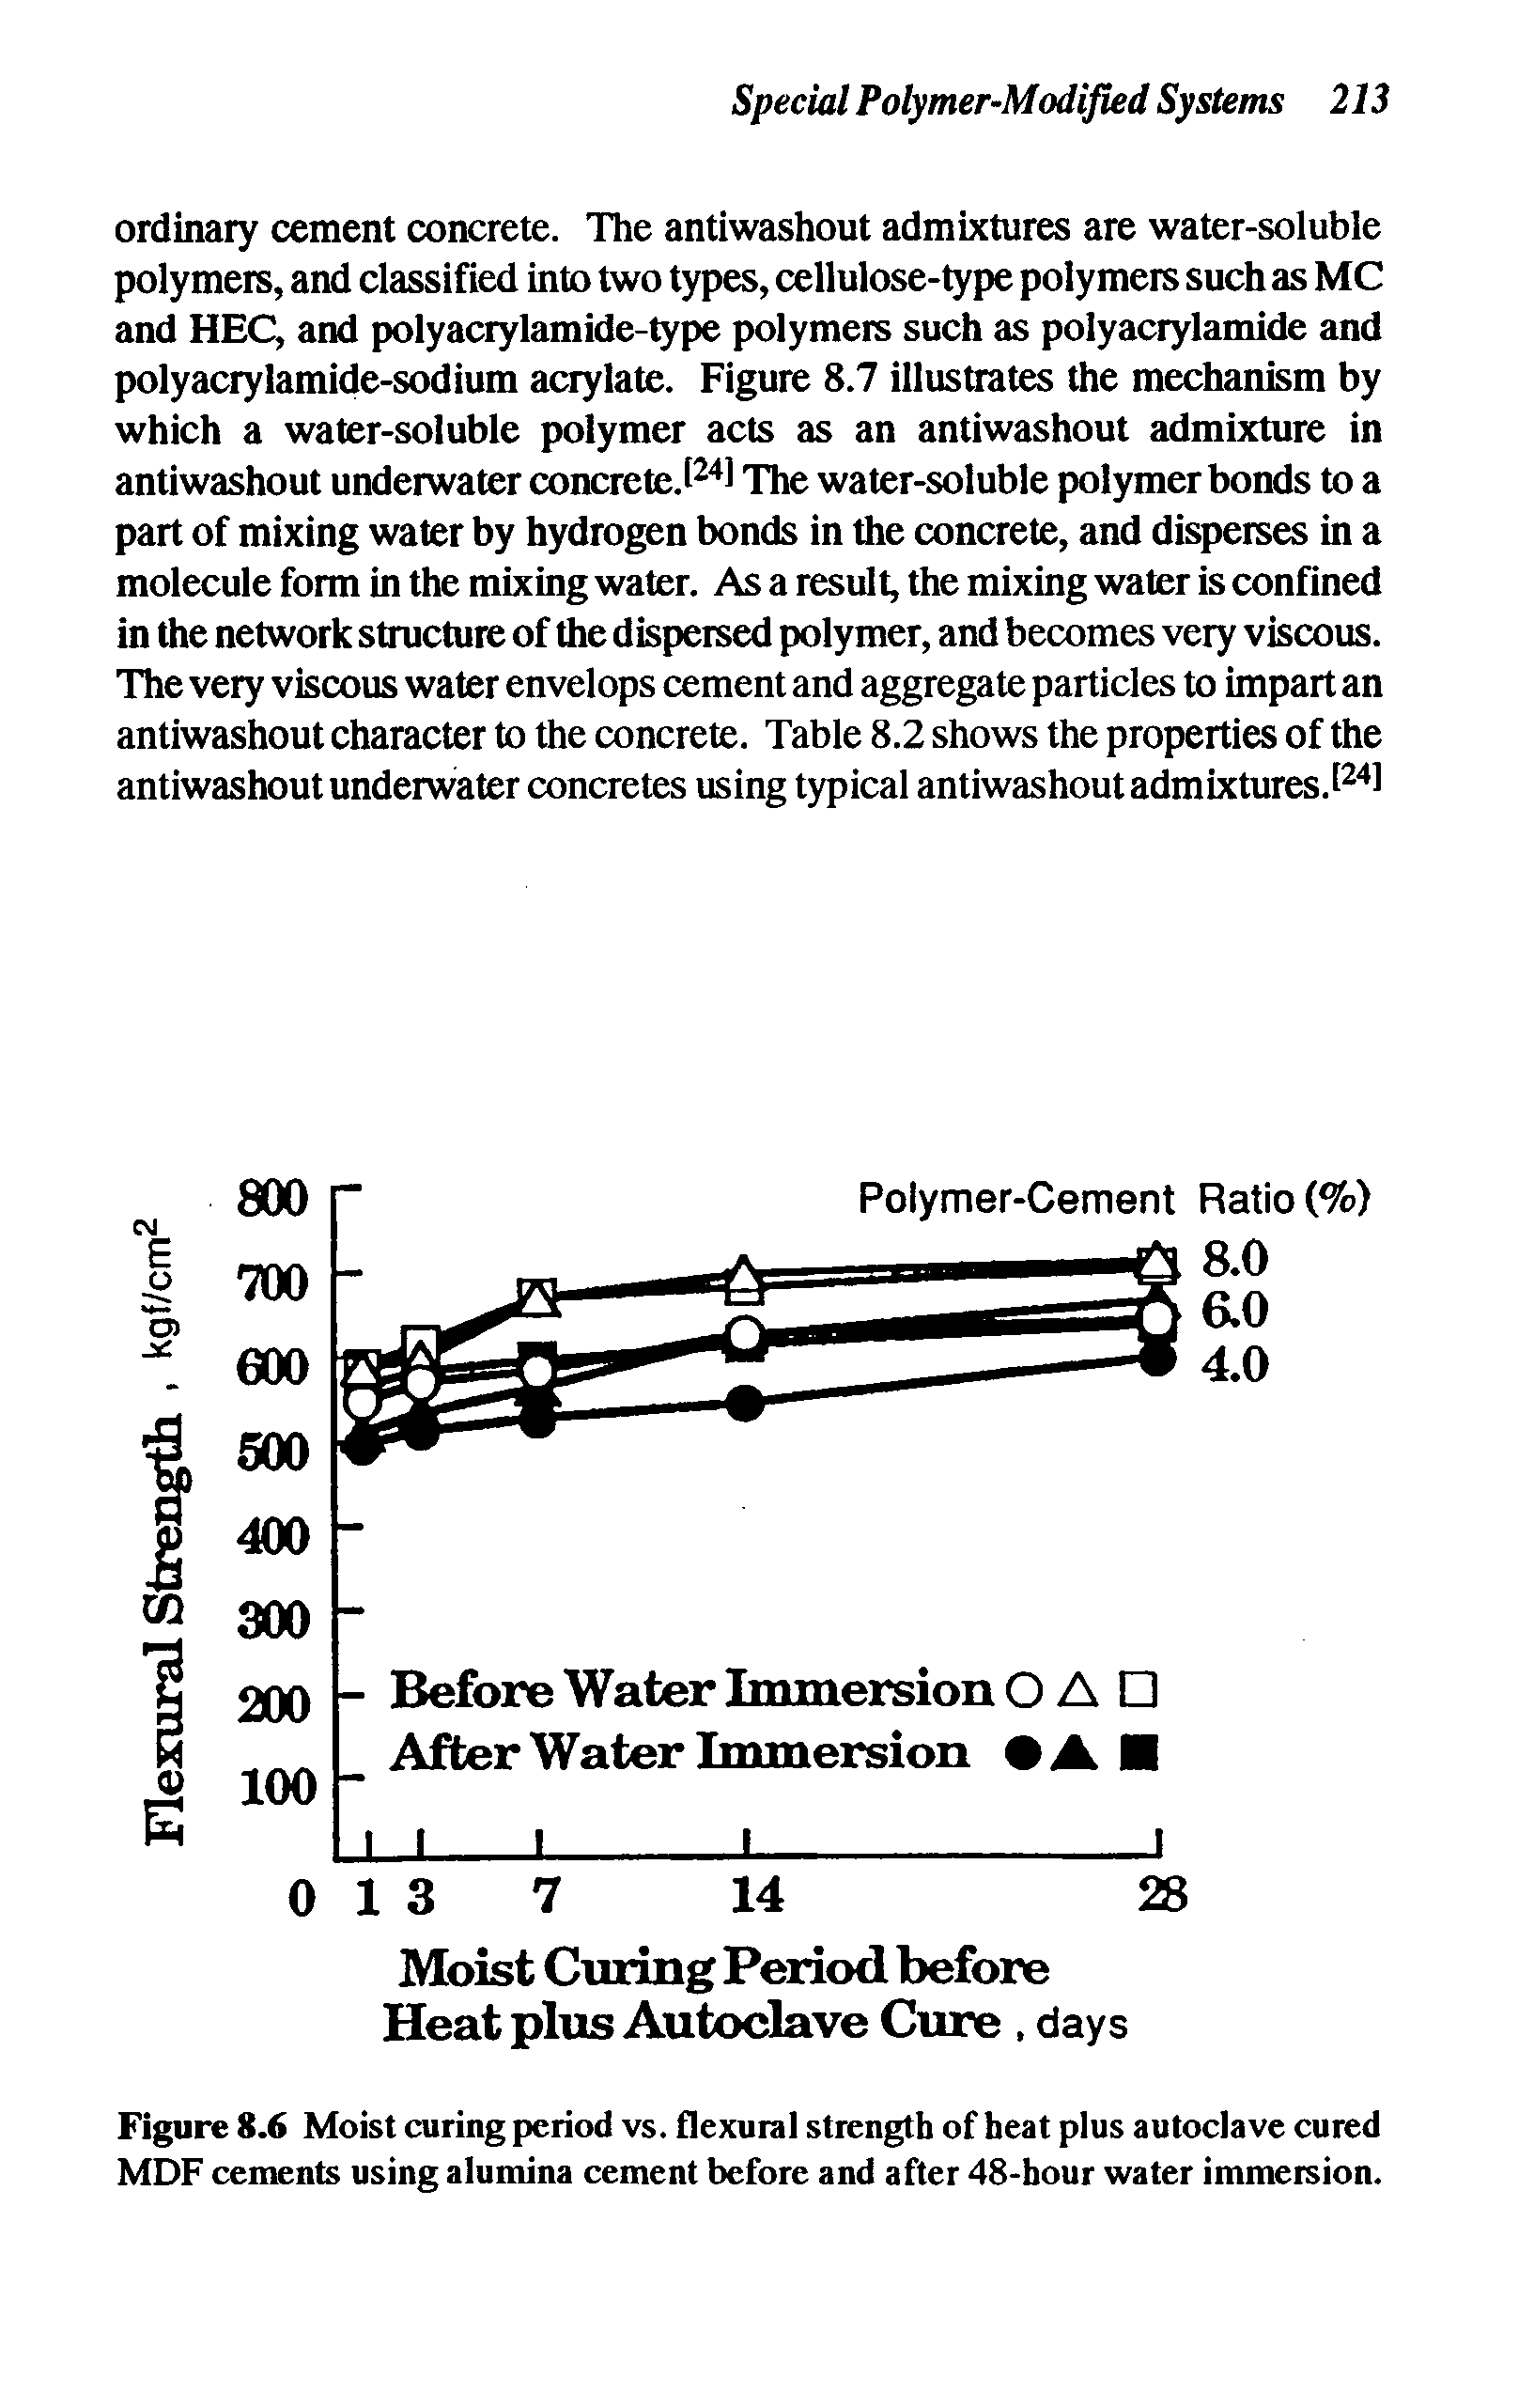 Figure 8.6 Moist curing period vs. flexural strength of heat plus autoclave cured MDF cements using alumina cement before and after 48-hour water immersion.